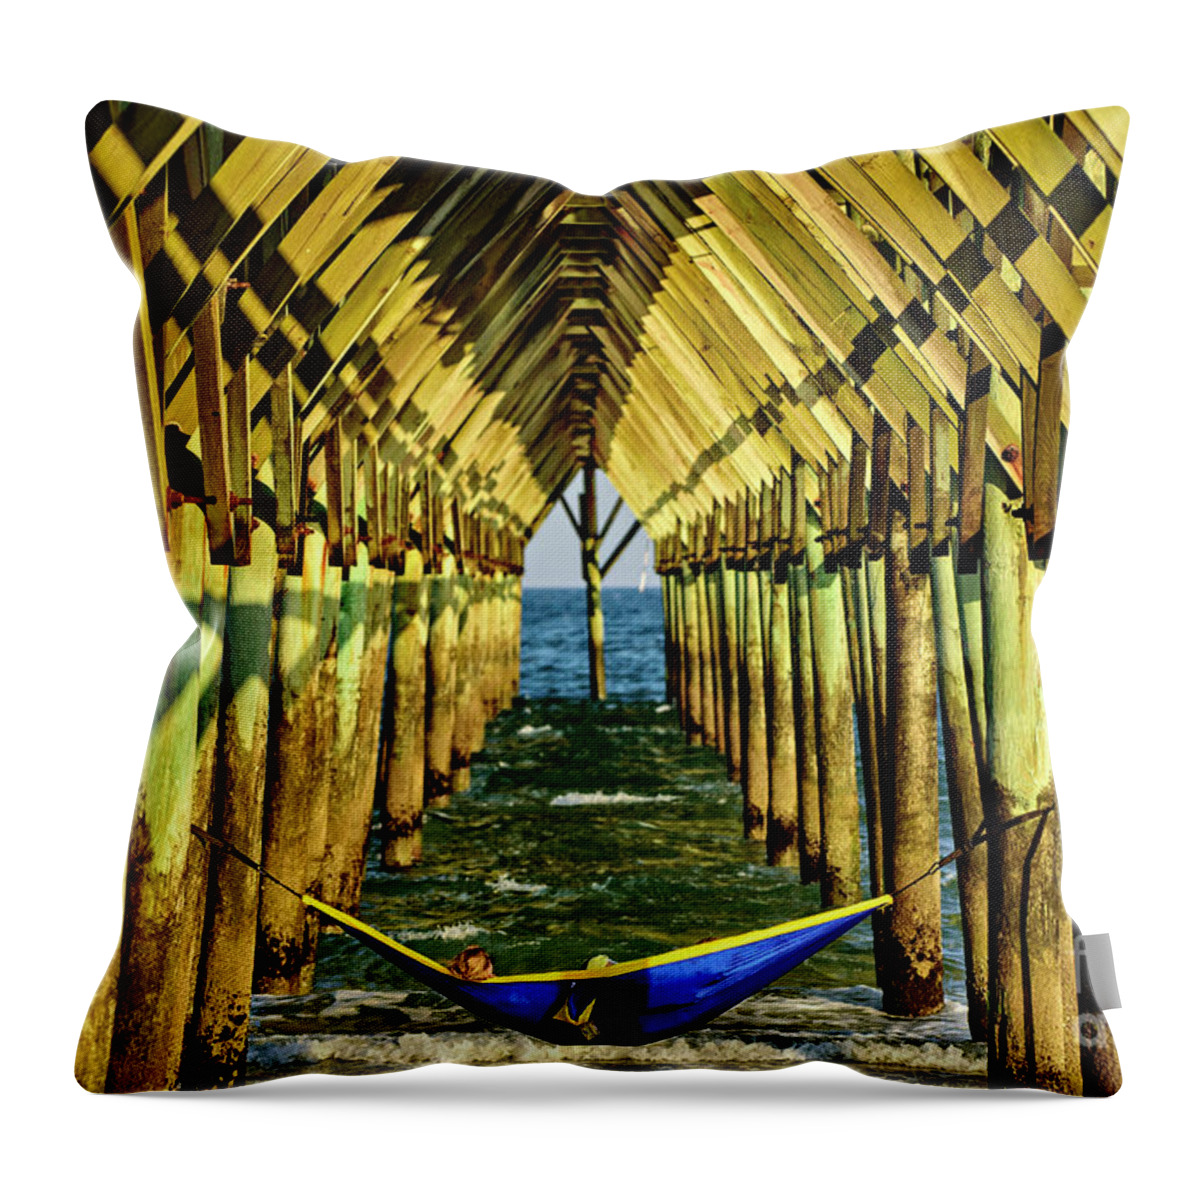 Surf City Throw Pillow featuring the photograph Chillin by DJA Images